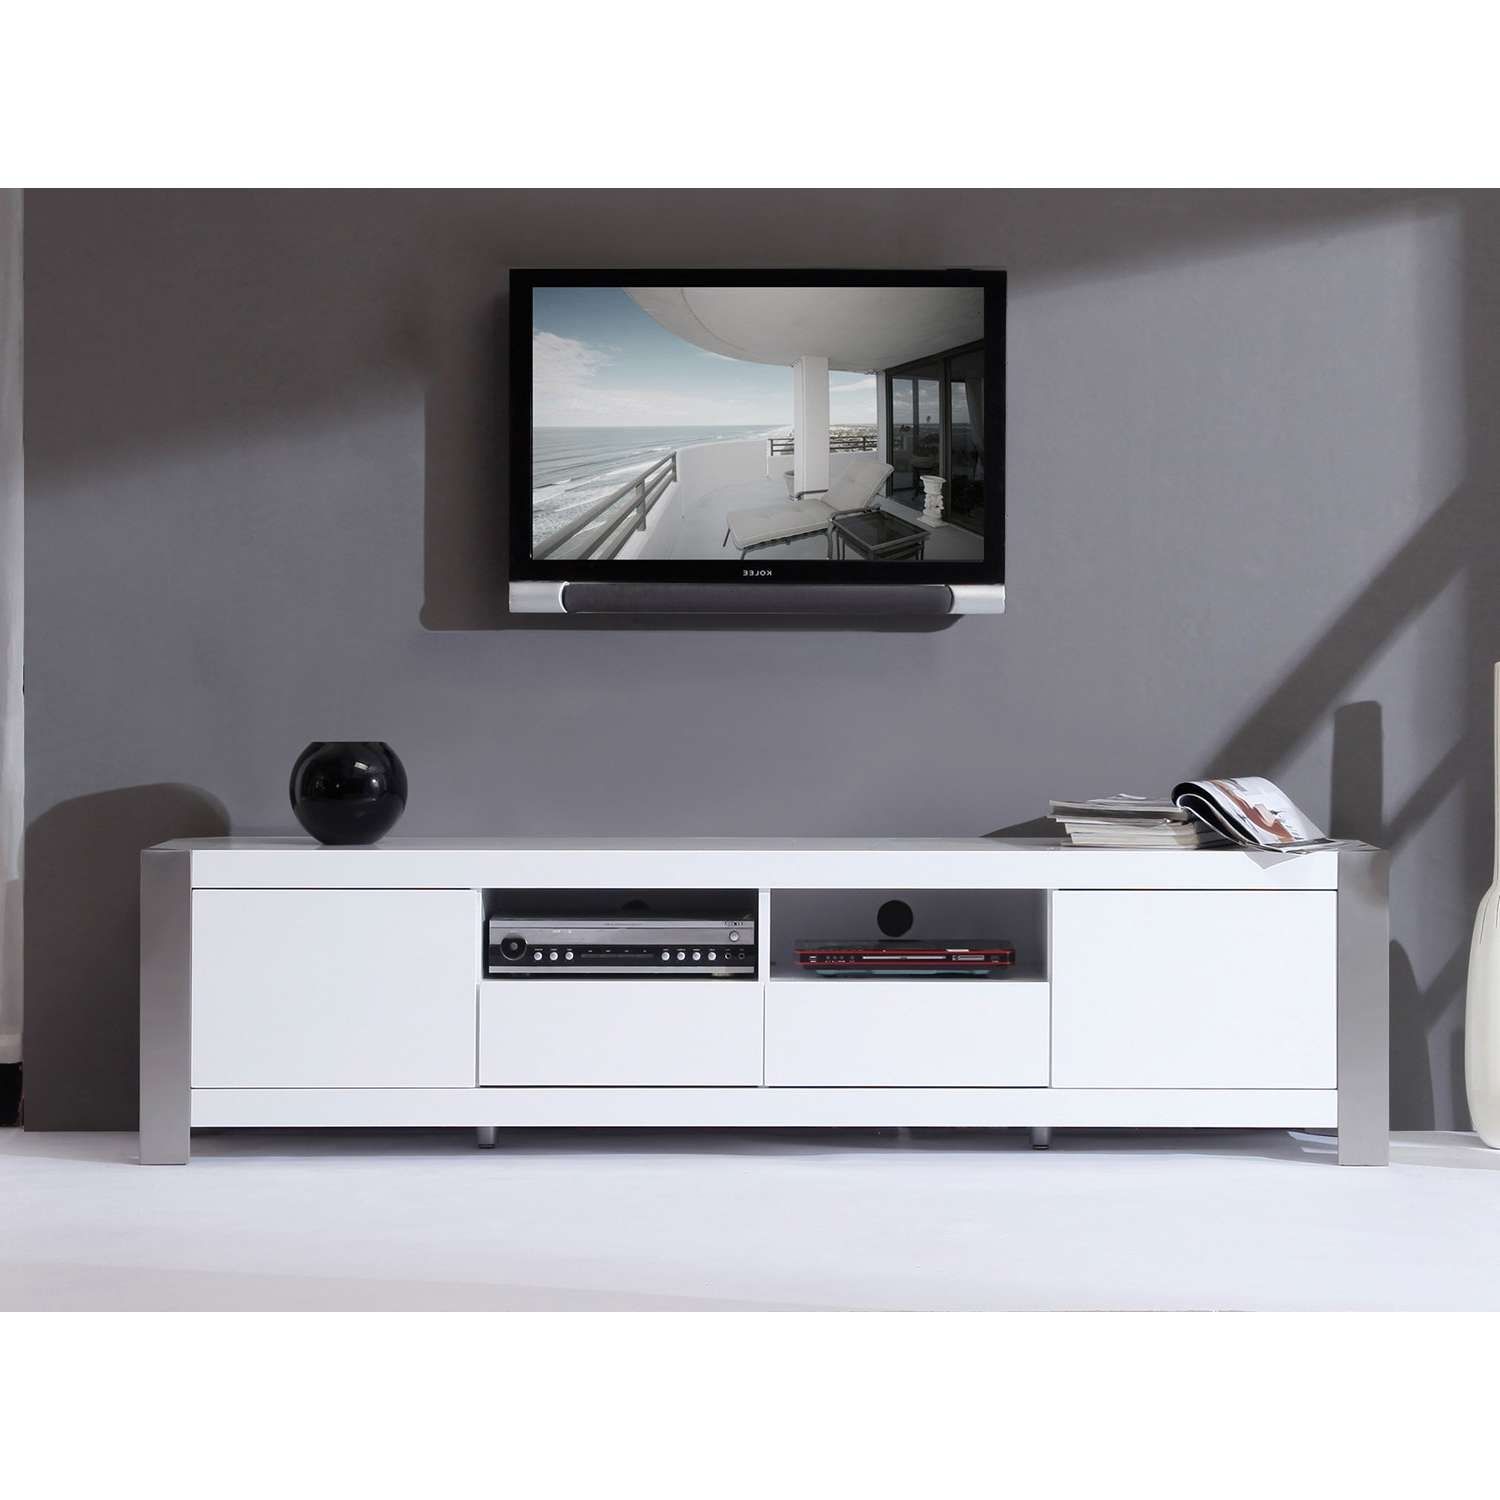 B Modern Composer 79" High Gloss White Tv Stand – Bm 100 Wht | The Pertaining To Gloss White Tv Stands (View 11 of 15)